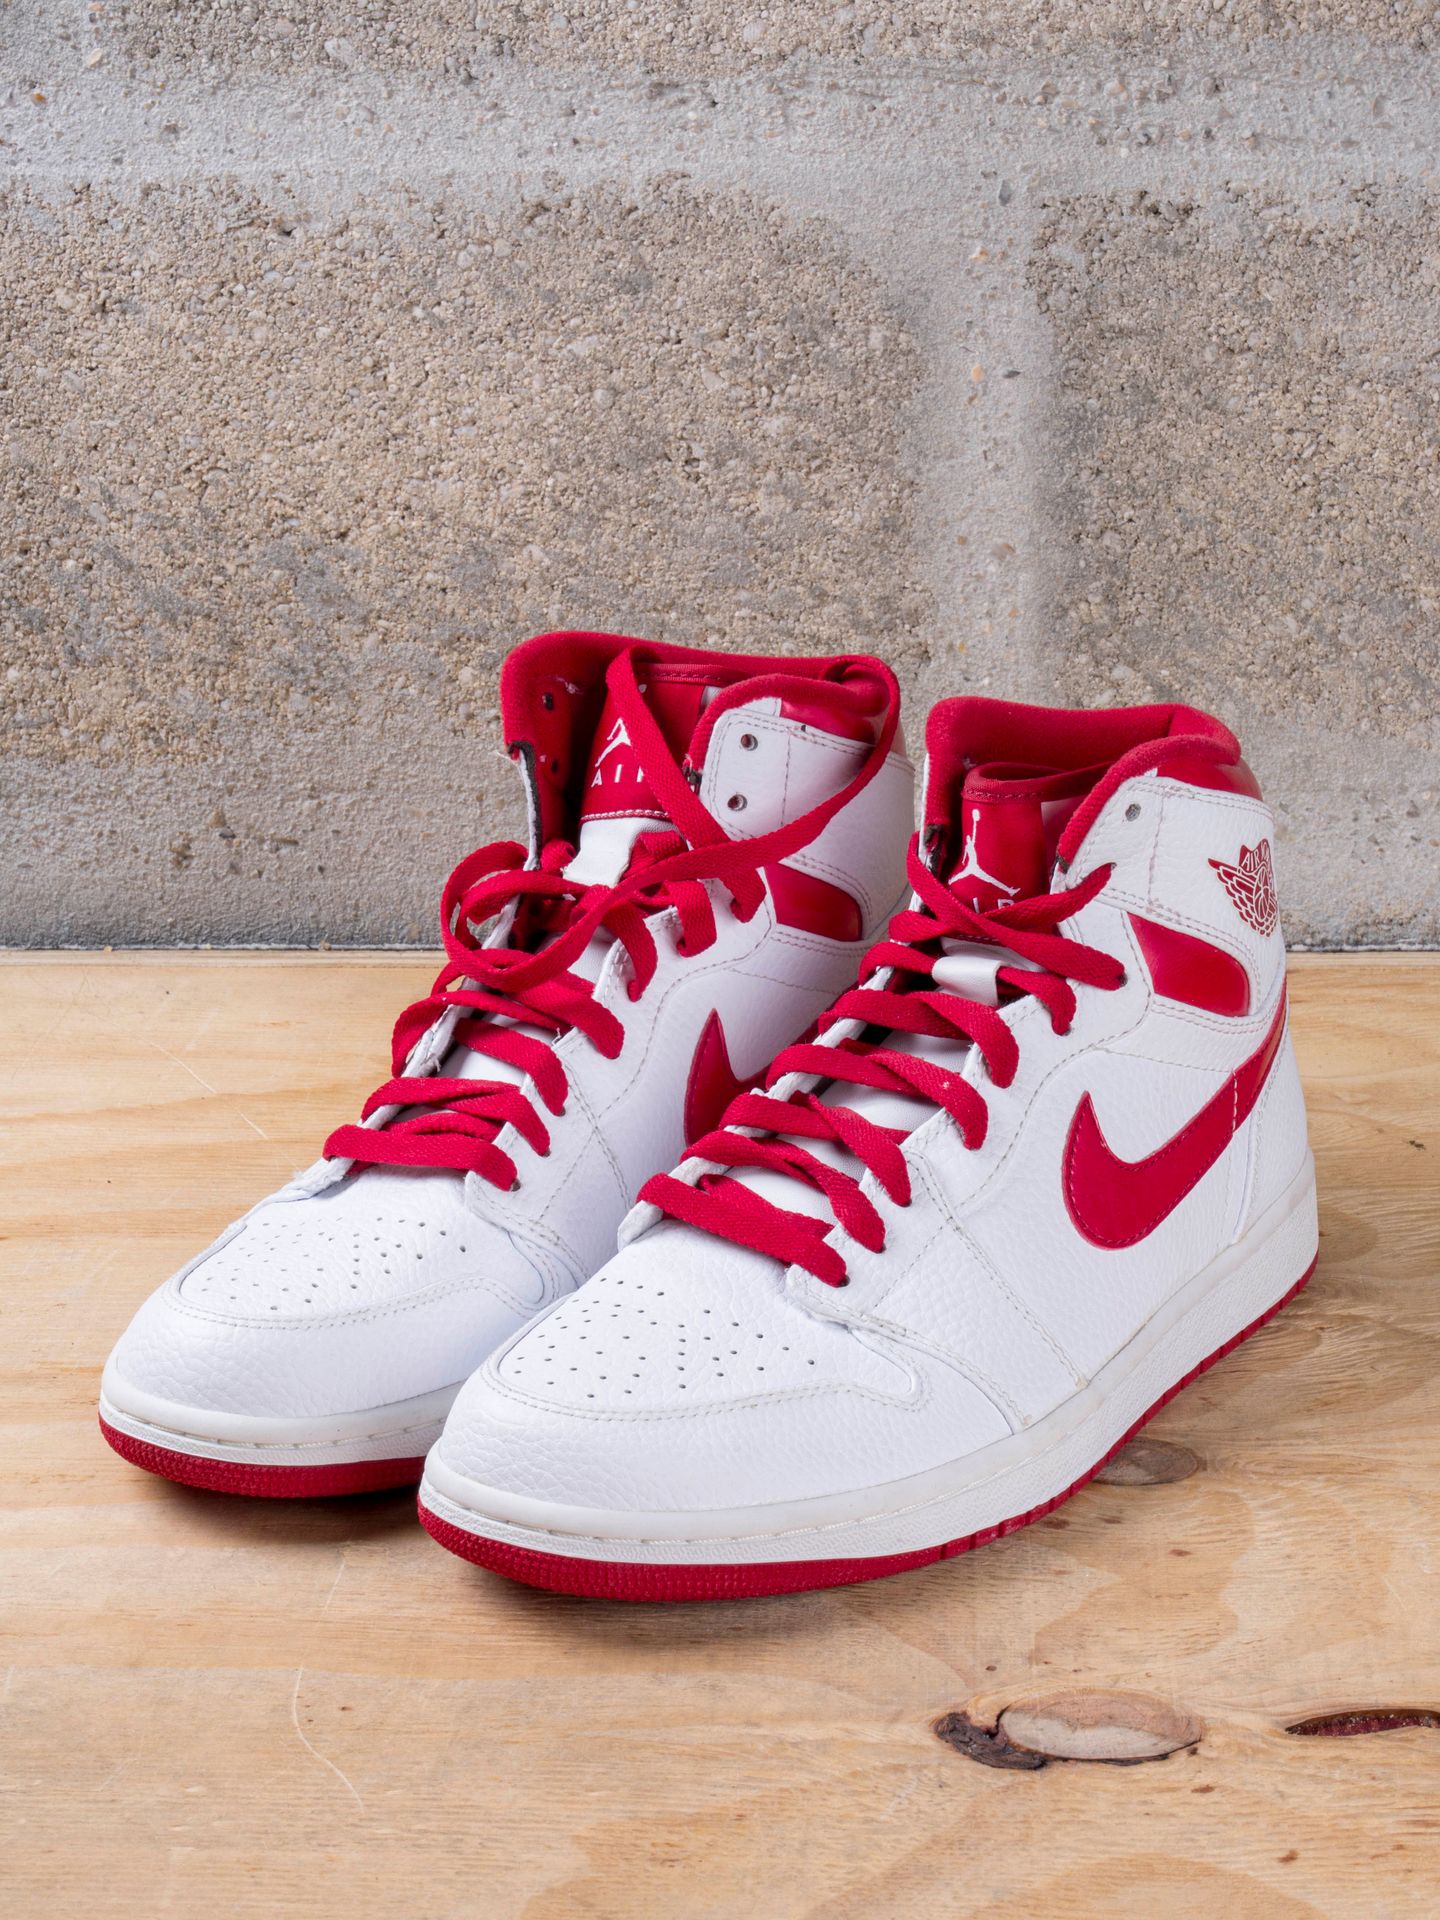 Null JORDAN 1

RETRO Do the Right Thing Red (2009)

(332550-161)

US 9 / EU 42,5&hellip;